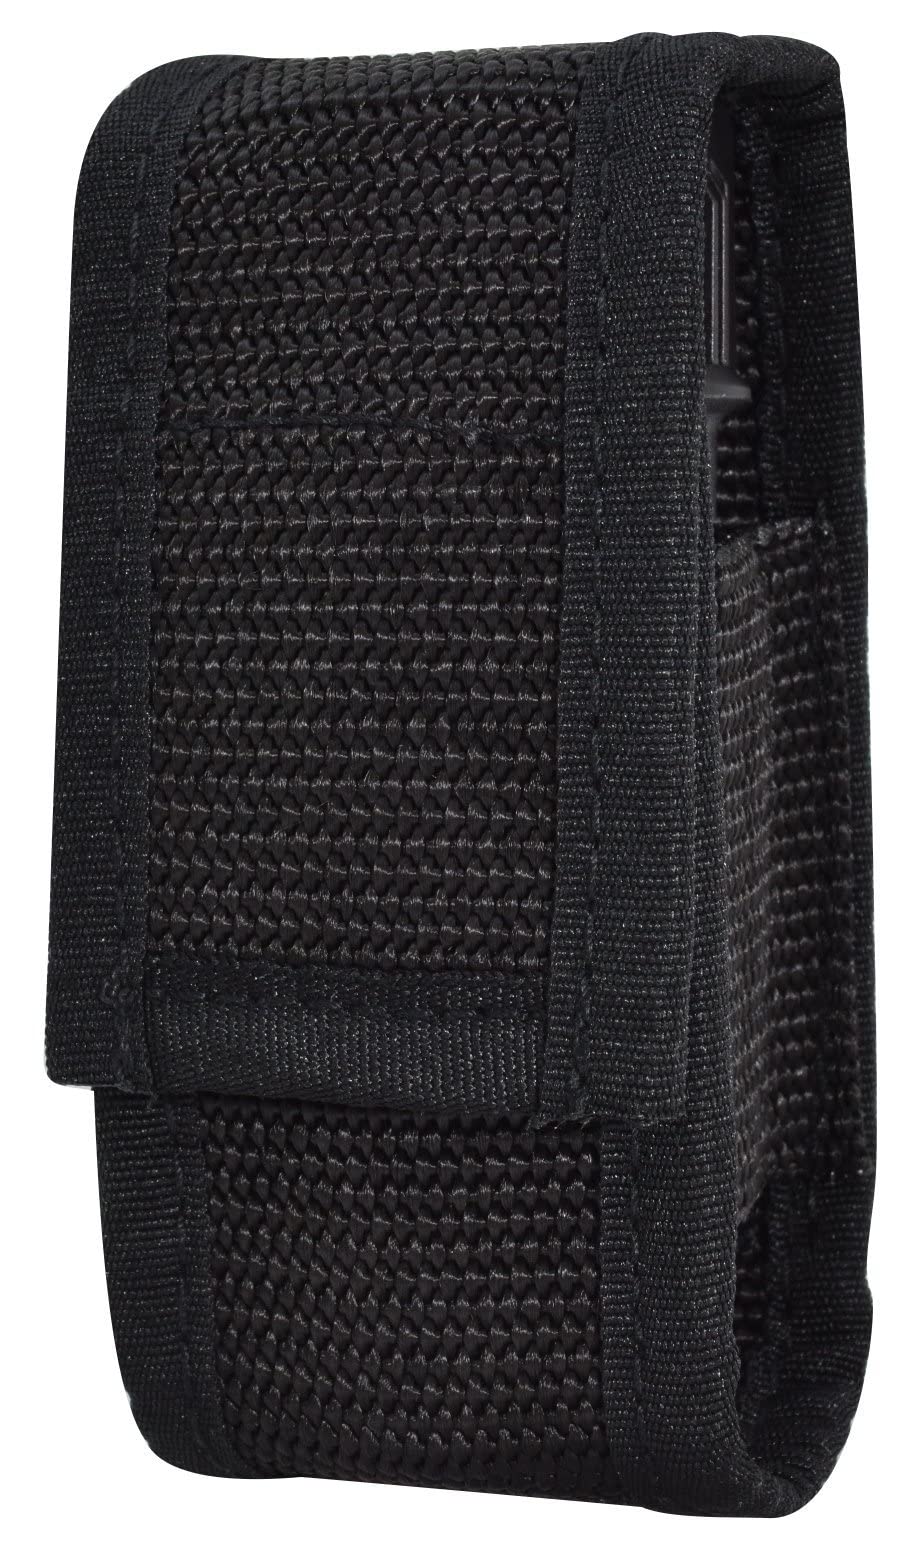 Holster, nylon - (fits 1.5 oz pepper spray, Fox Labs, Sabre, Freeze +P, Wildfire) -Holster only, pepper spray not included.